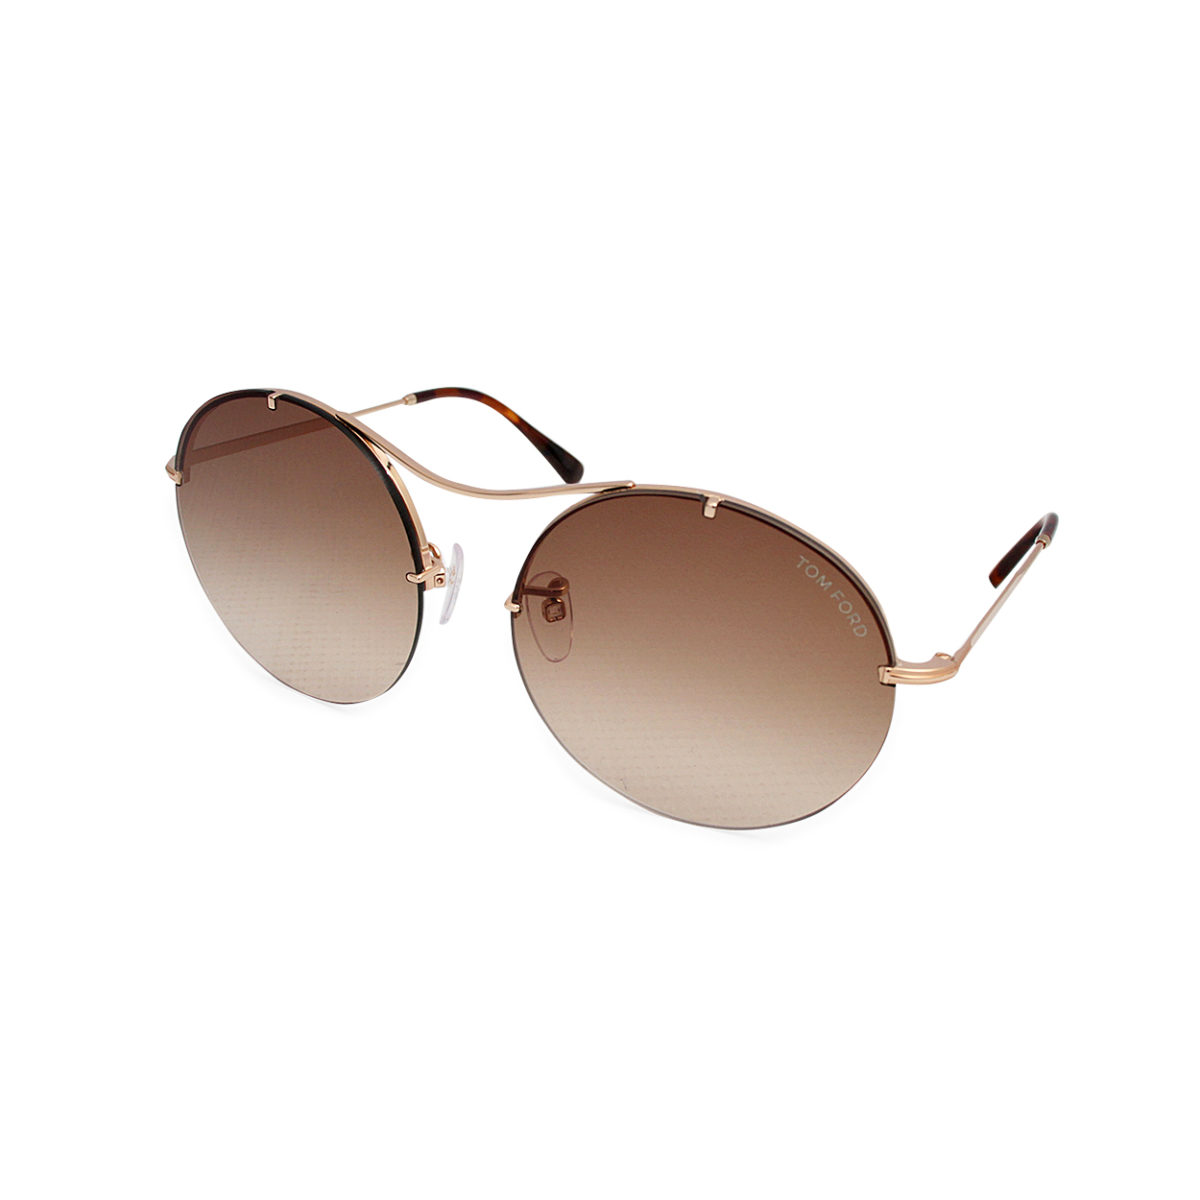 TOM FORD Veronique-02 Sunglasses TF565 Brown - NEW | Luxity